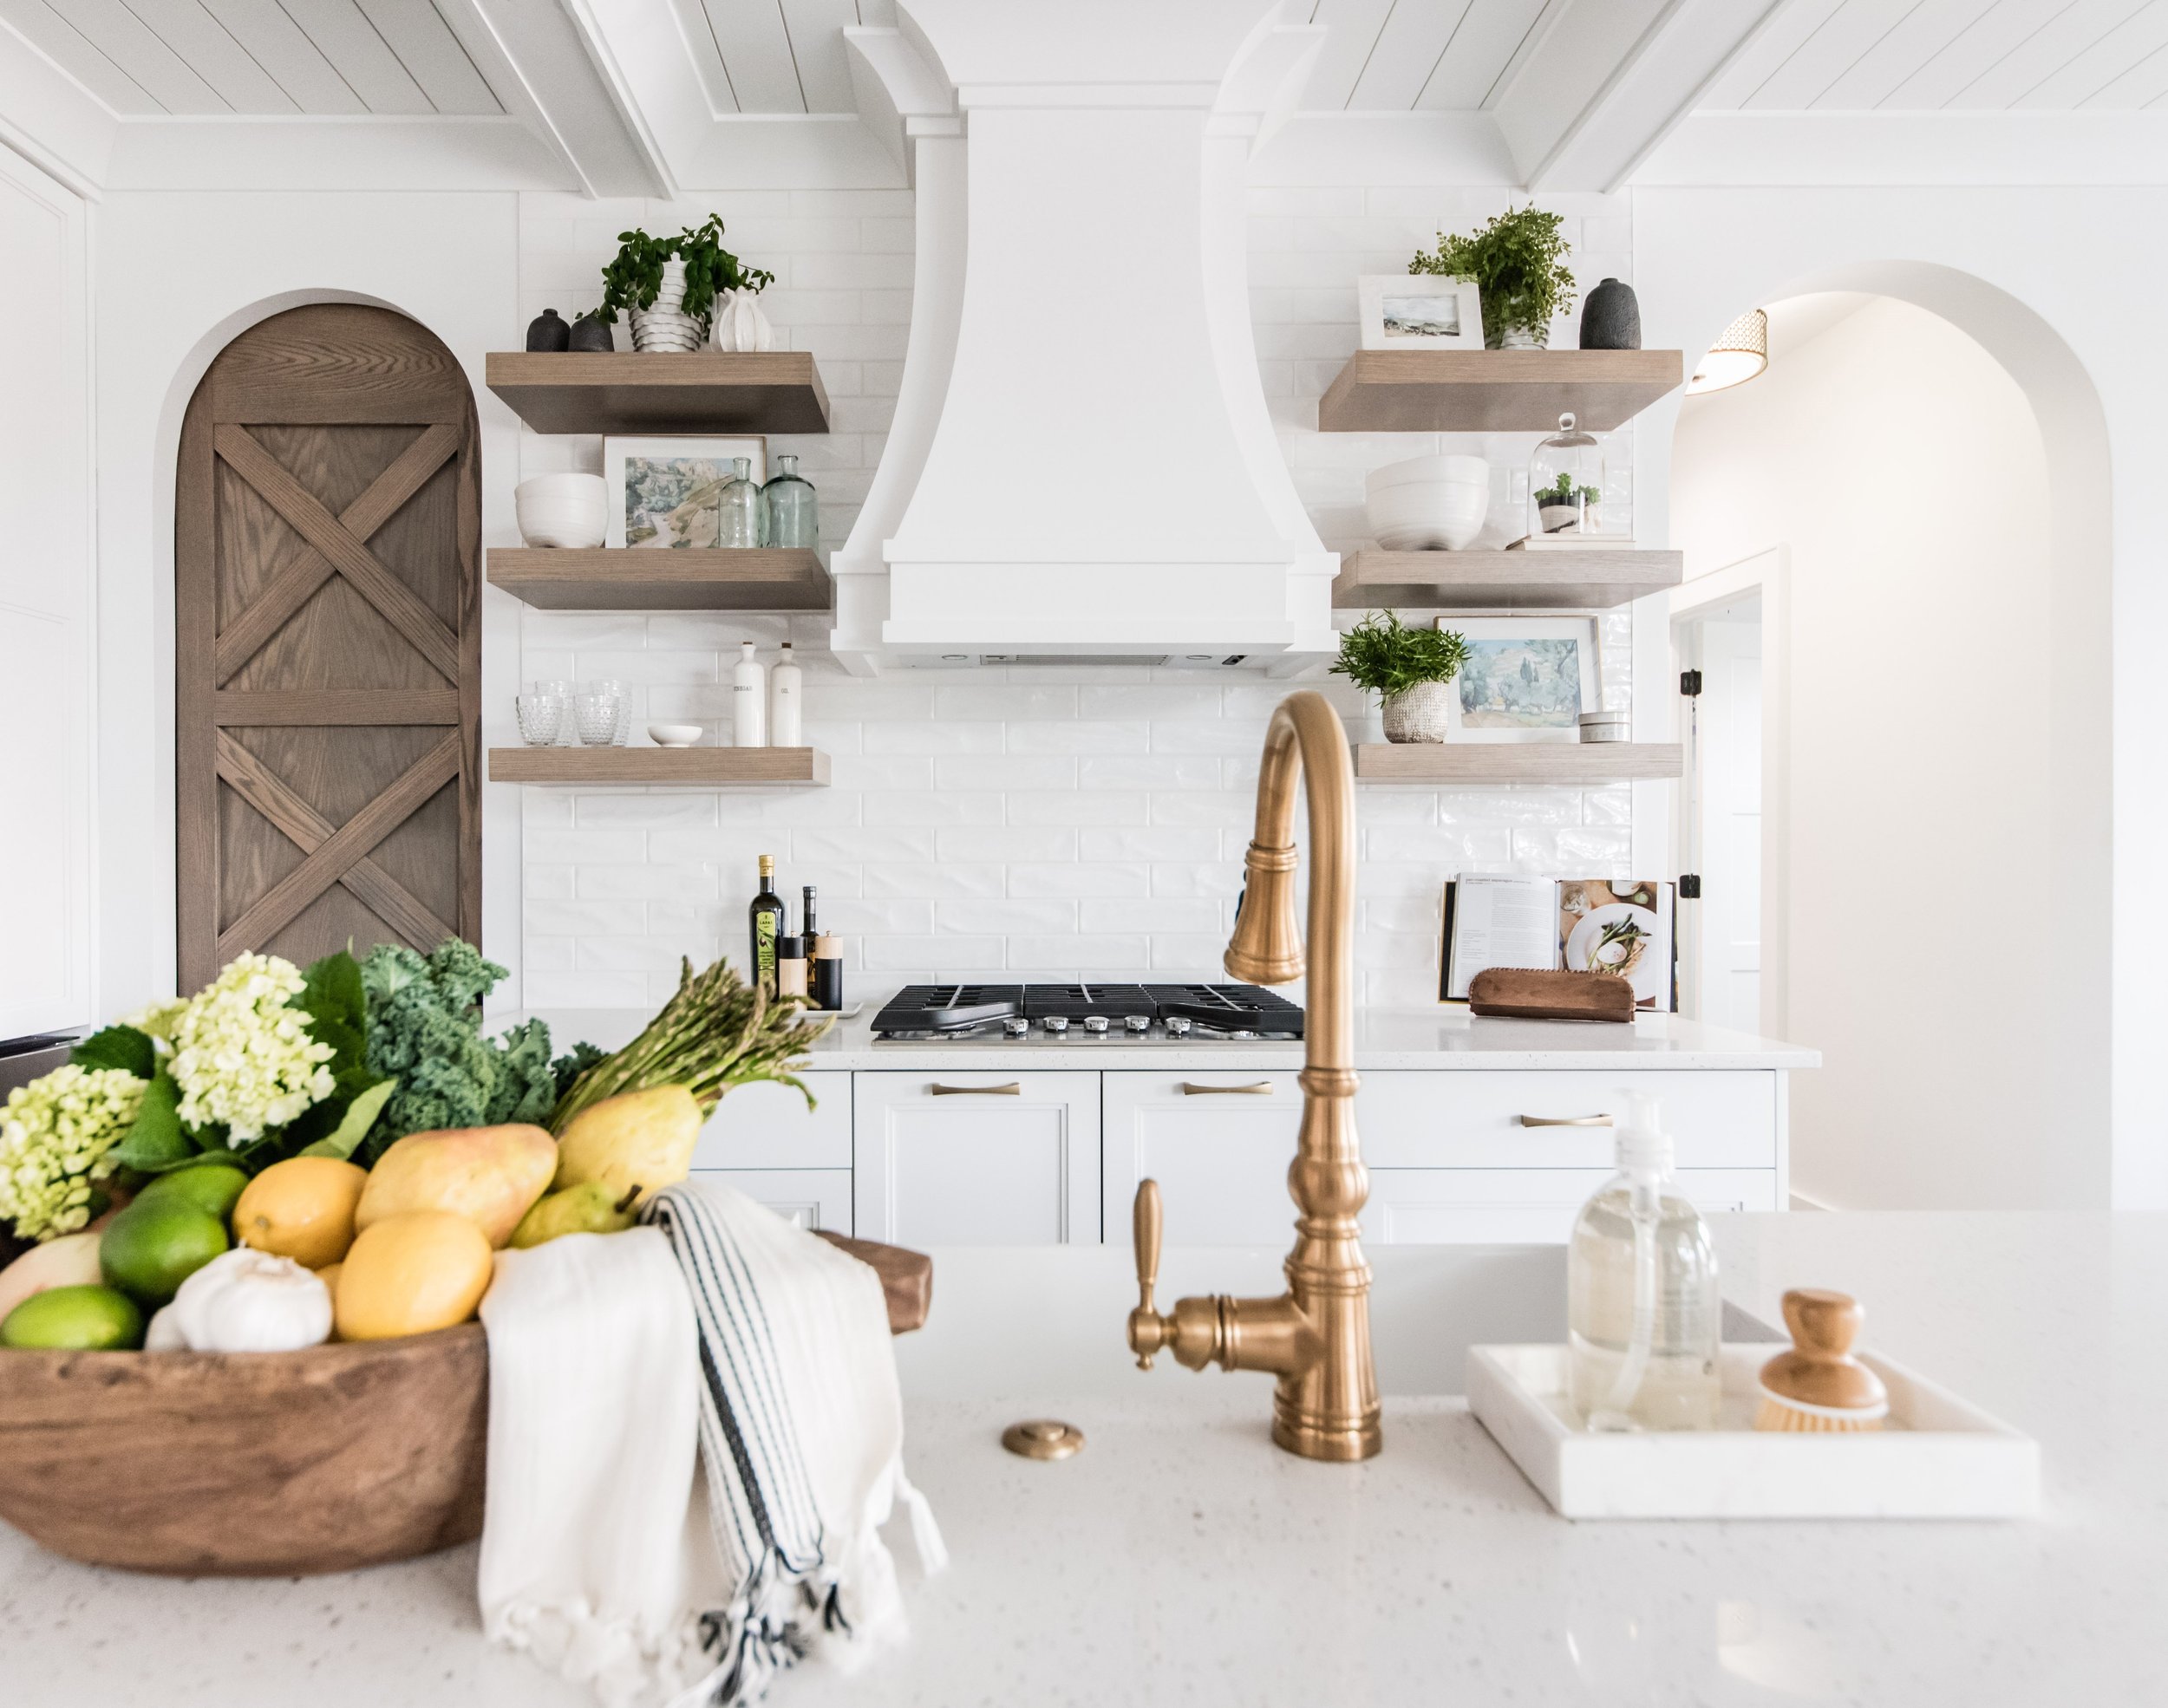  Liz Powell Design tells what kind of tile to use in your kitchen when building your dream house. kitchen tile ideas white tile backsplash ideas #LizPowellDesign #InteriorDesignUtah #InteriorDesigner #buildingahome #tile #backsplash #dreamhome #inter